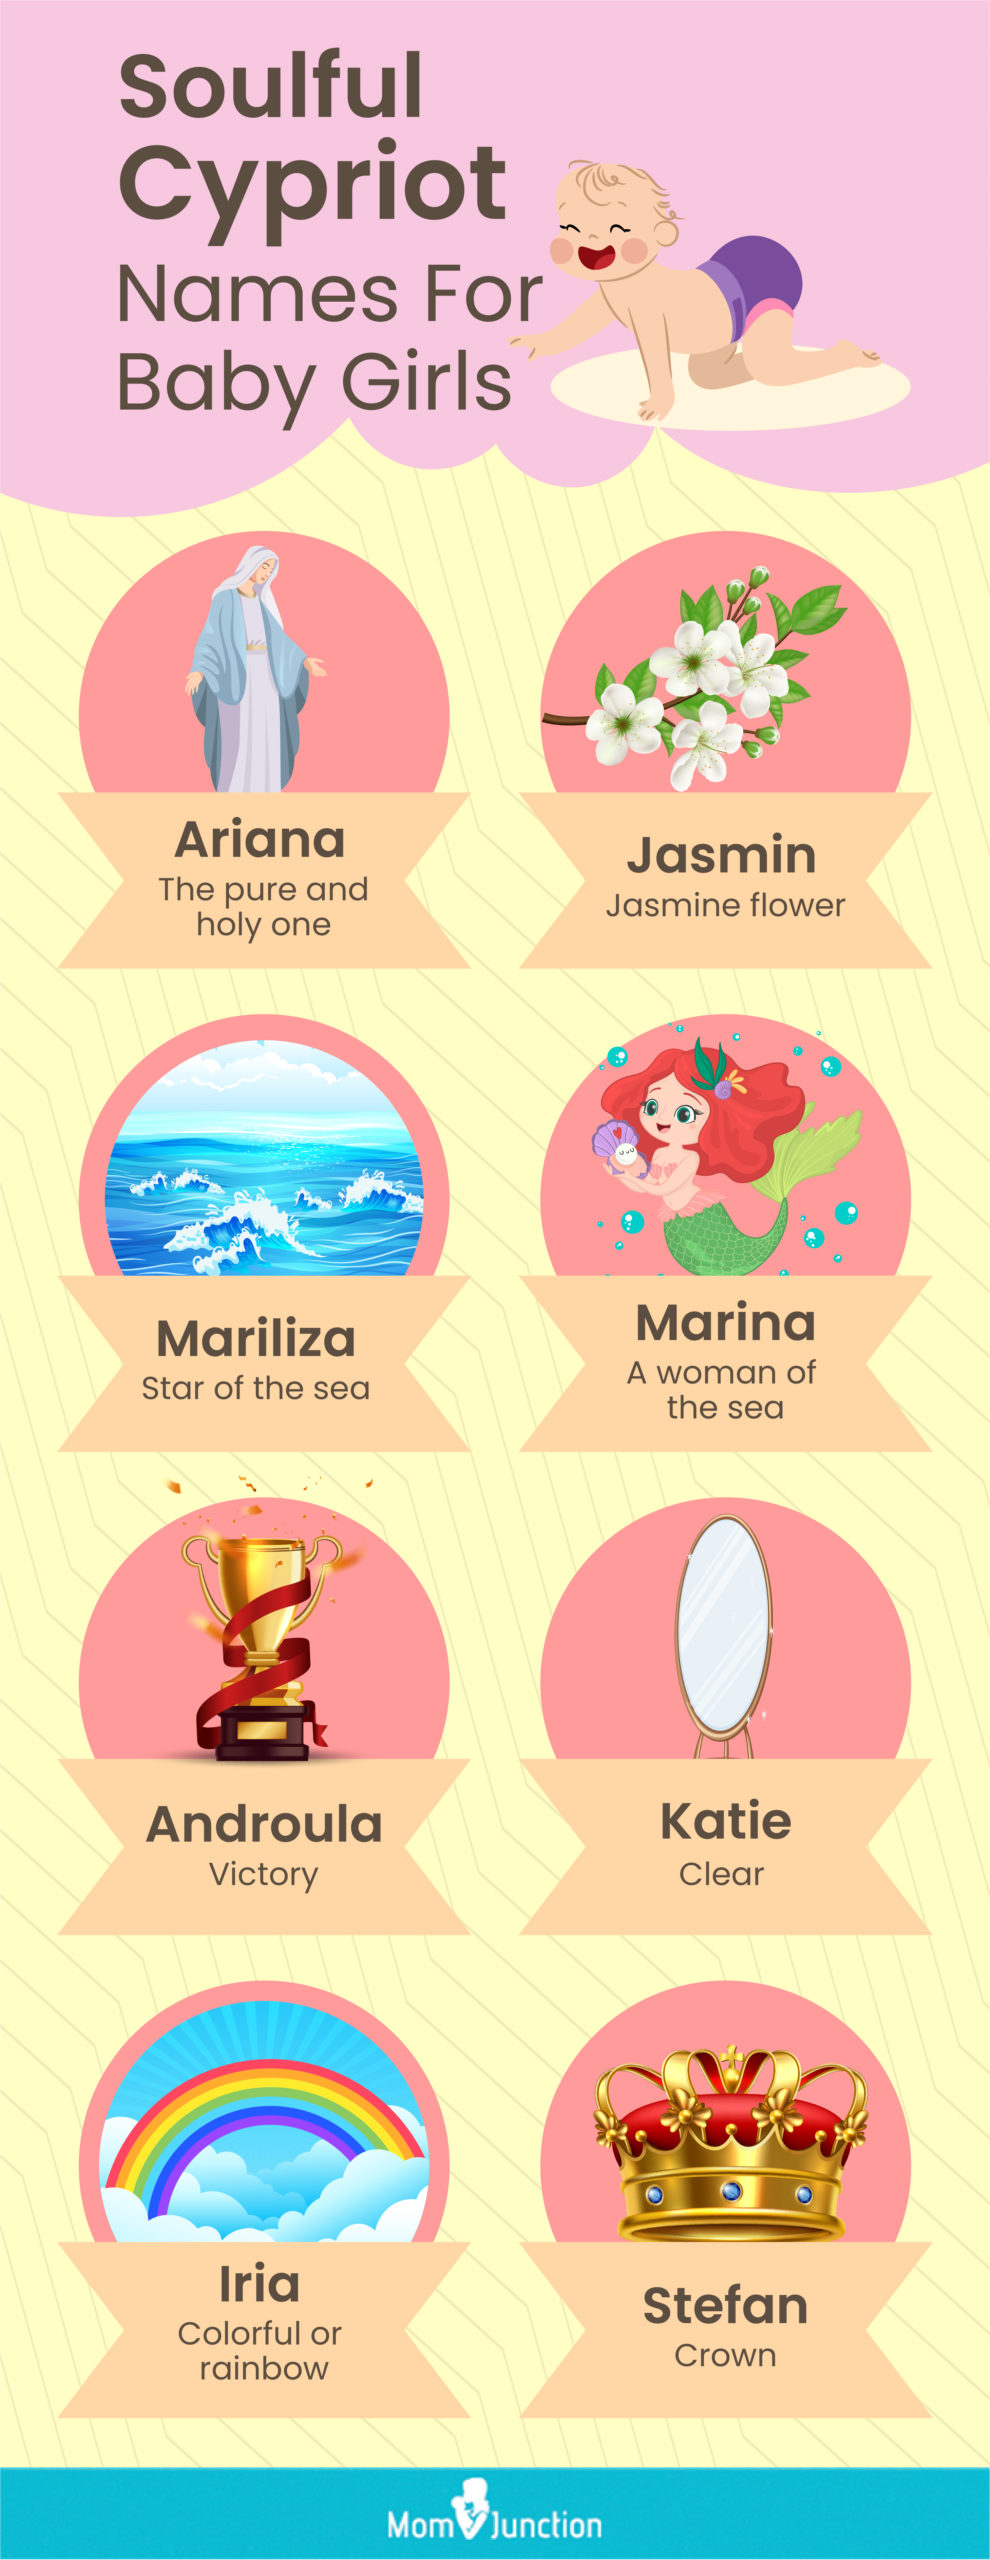 soulful cypriot names for baby girls (infographic)